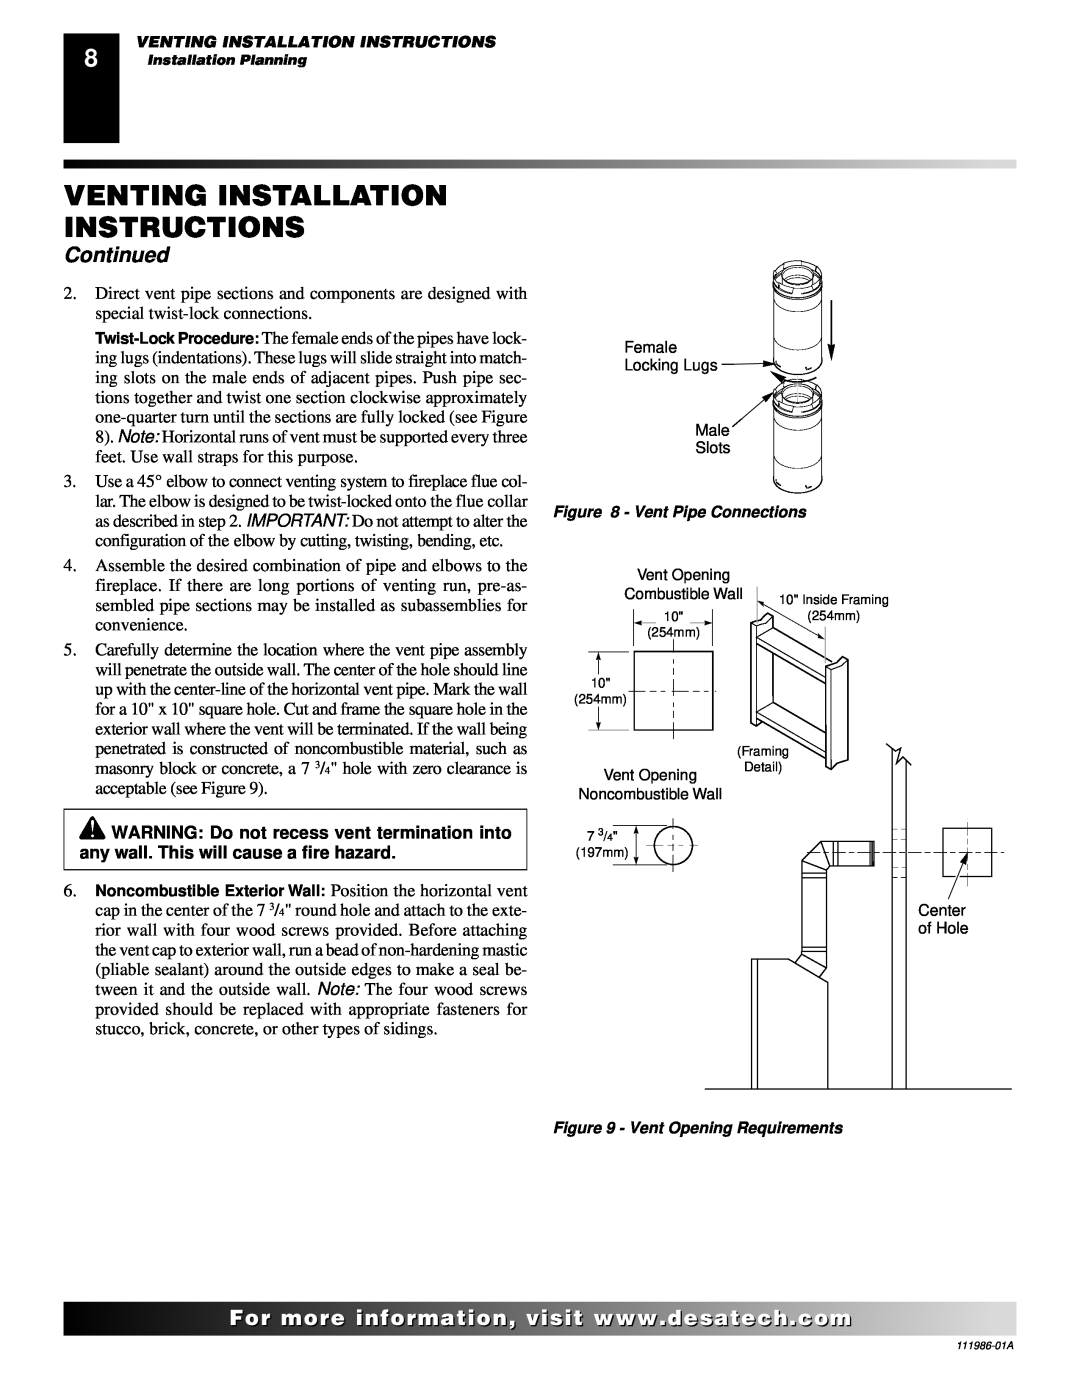 Desa T32P, T32N Venting Installation Instructions, Continued, For..com, Female Locking Lugs Male Slots, Center 